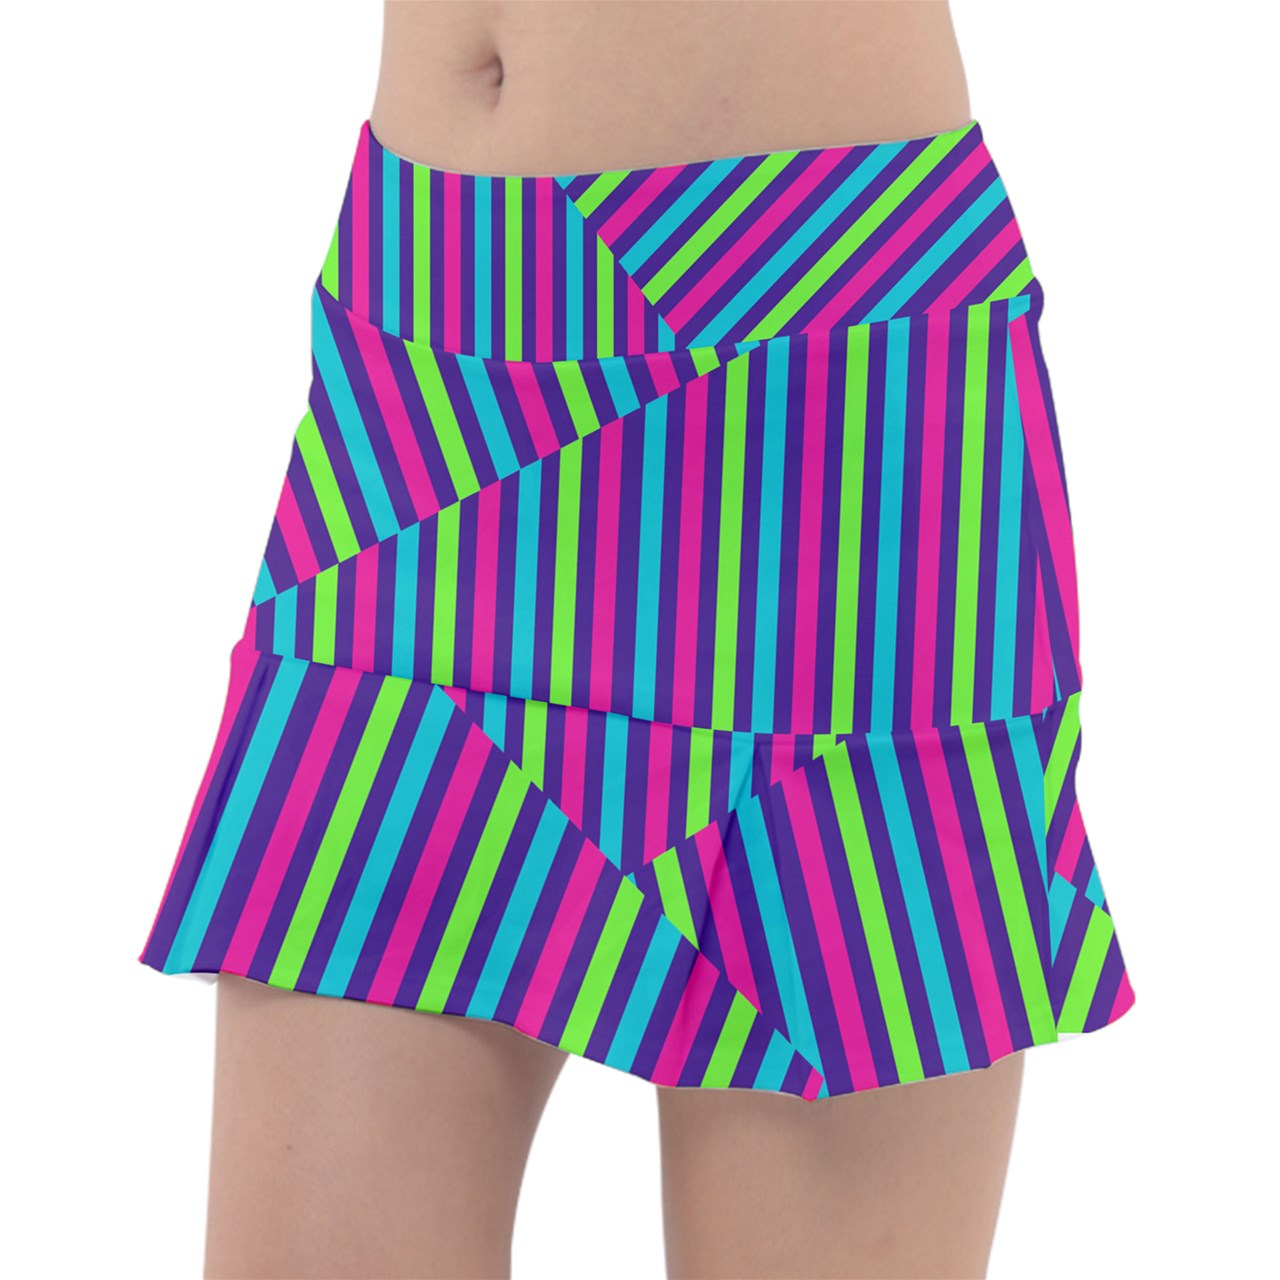 Dizzy Pickle Diana Stripes Classic Women's Pickleball Pleated Skorts with Inner Shorts & Pockets